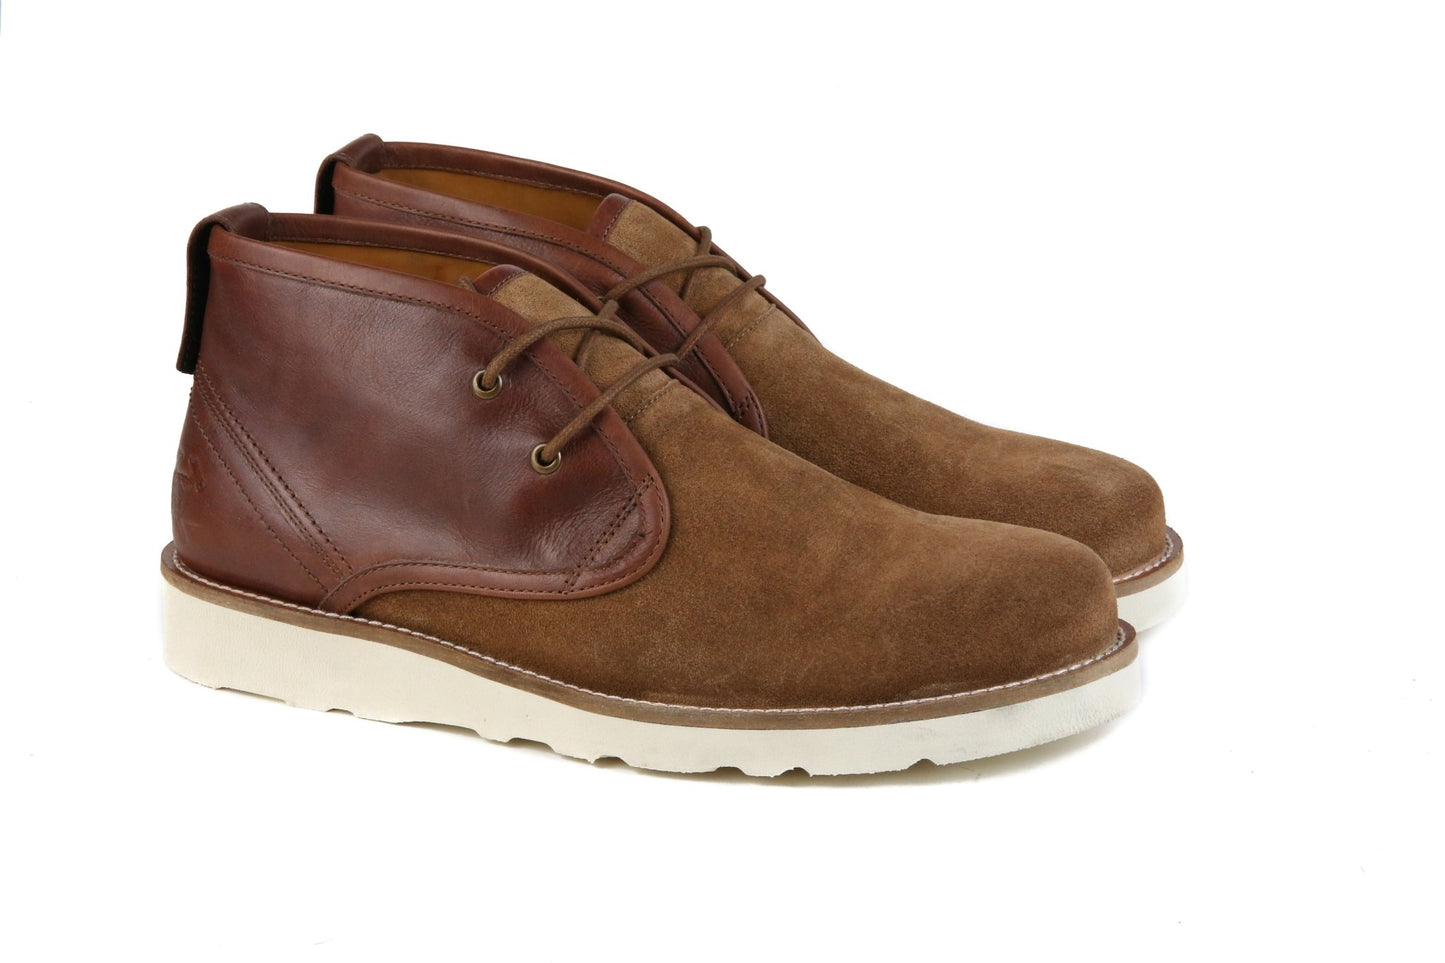 Hound & Hammer "The Nolan" Cognac Leather & Suede Boots - Men - Footwear - Boots - Ankle Boots - Benn~Burry